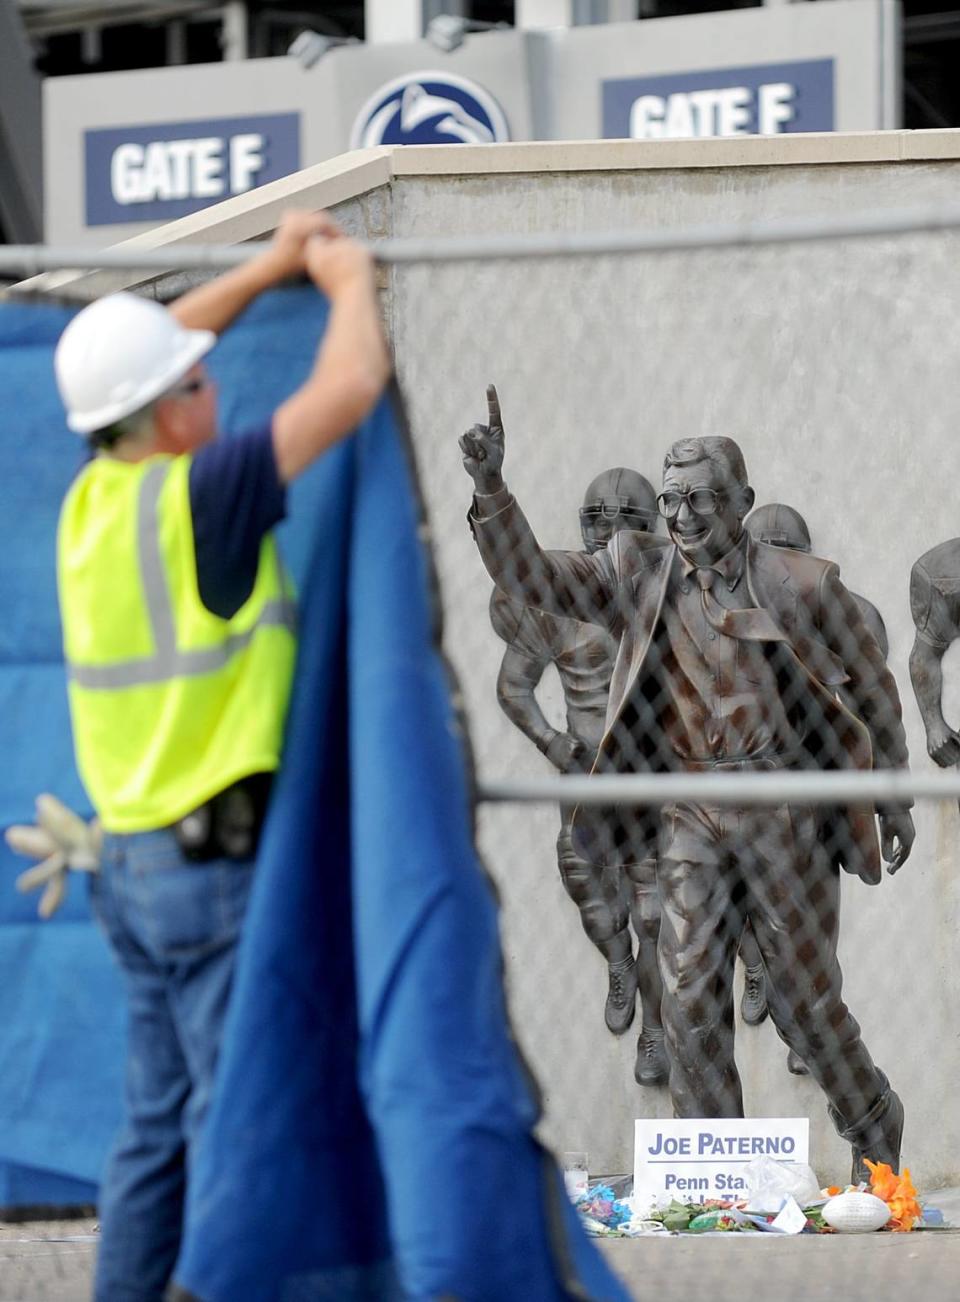 A worker hangs a blue tarp over the fence that was put up around the Joe Paterno statue as crews worked to remove the statue in the early hours of Sunday, July 22, 2012.